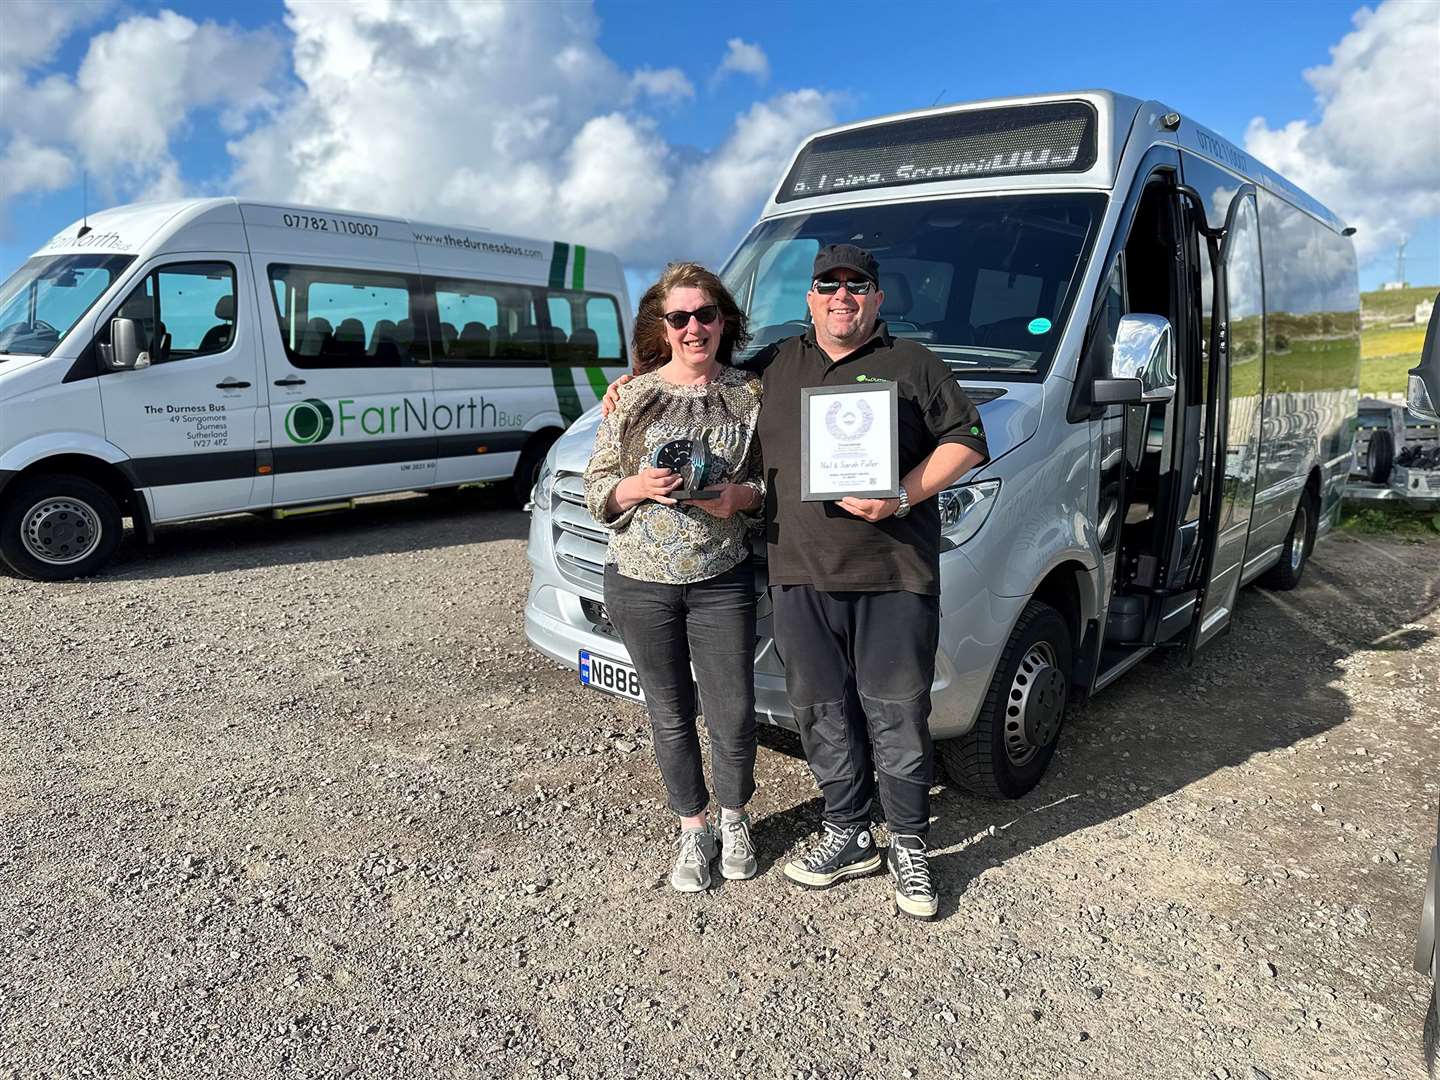 Neil and Sarah Fuller of Durness Bus.